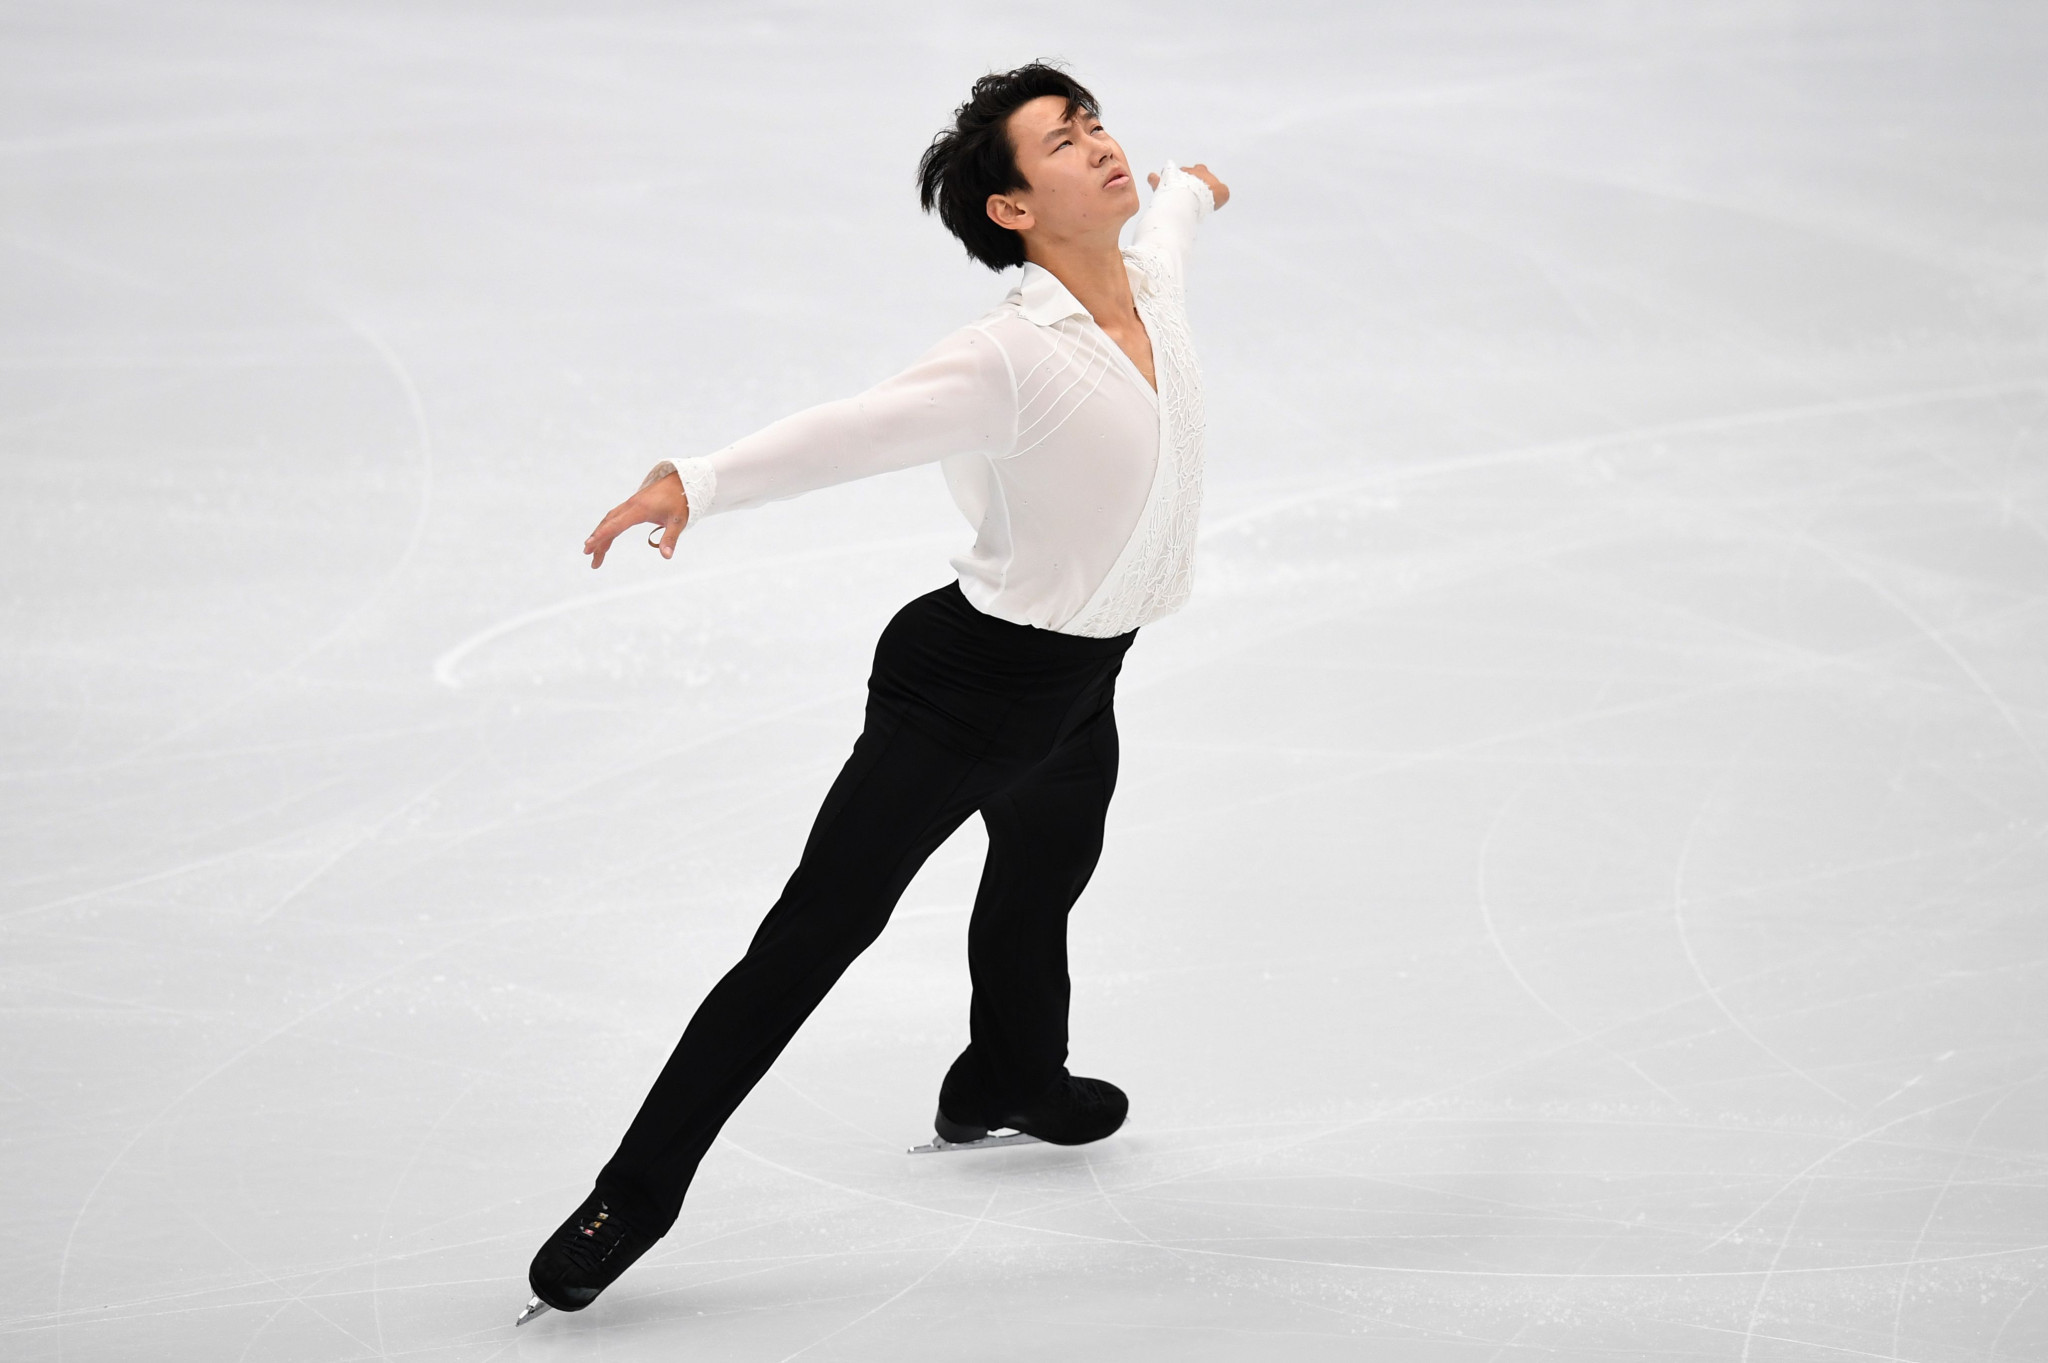 Denis Ten was stabbed to death in a knife attack in Almaty ©Getty Images